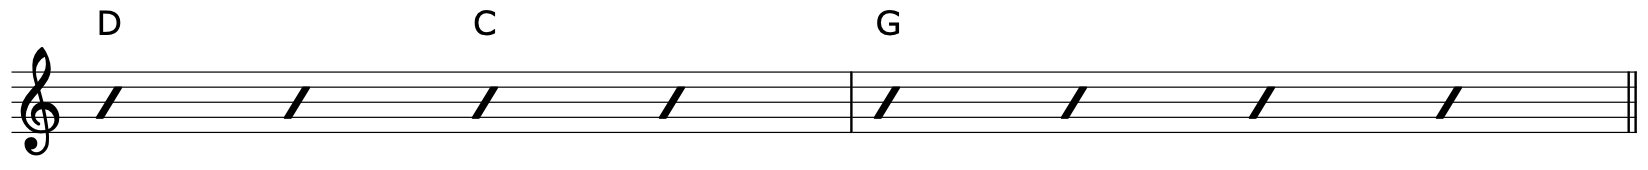 Mixolydian-Chord-Song-Example-1